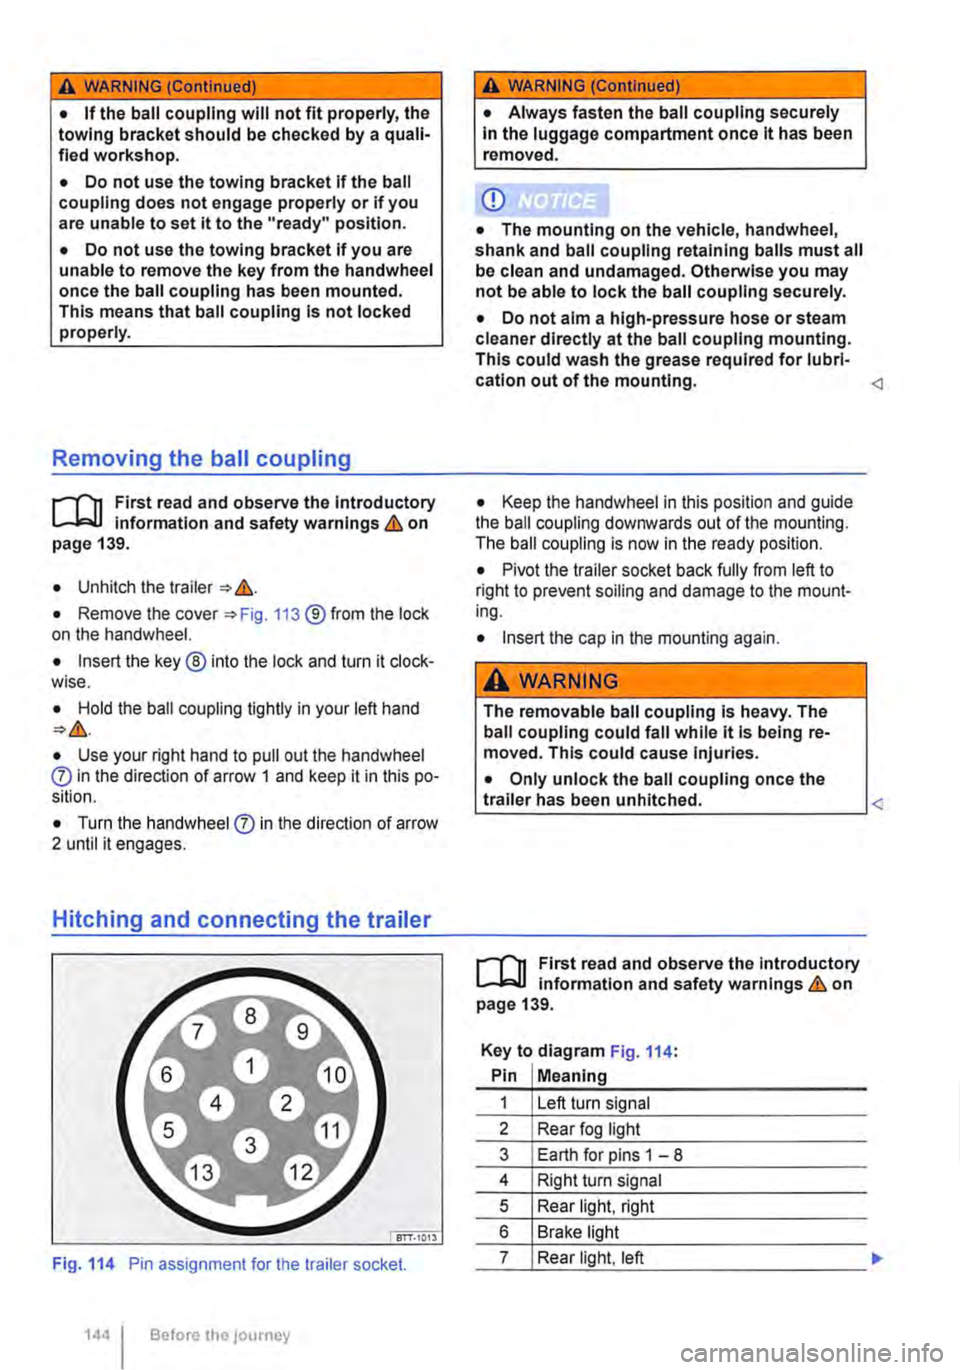 VOLKSWAGEN TRANSPORTER 2011  Owners Manual A WARNING (Continued) 
• If the ball coupling will not fit properly, the towing bracket should be checked by a quali-fied workshop. 
• Do not use the towing bracket If the ball coupling does not e